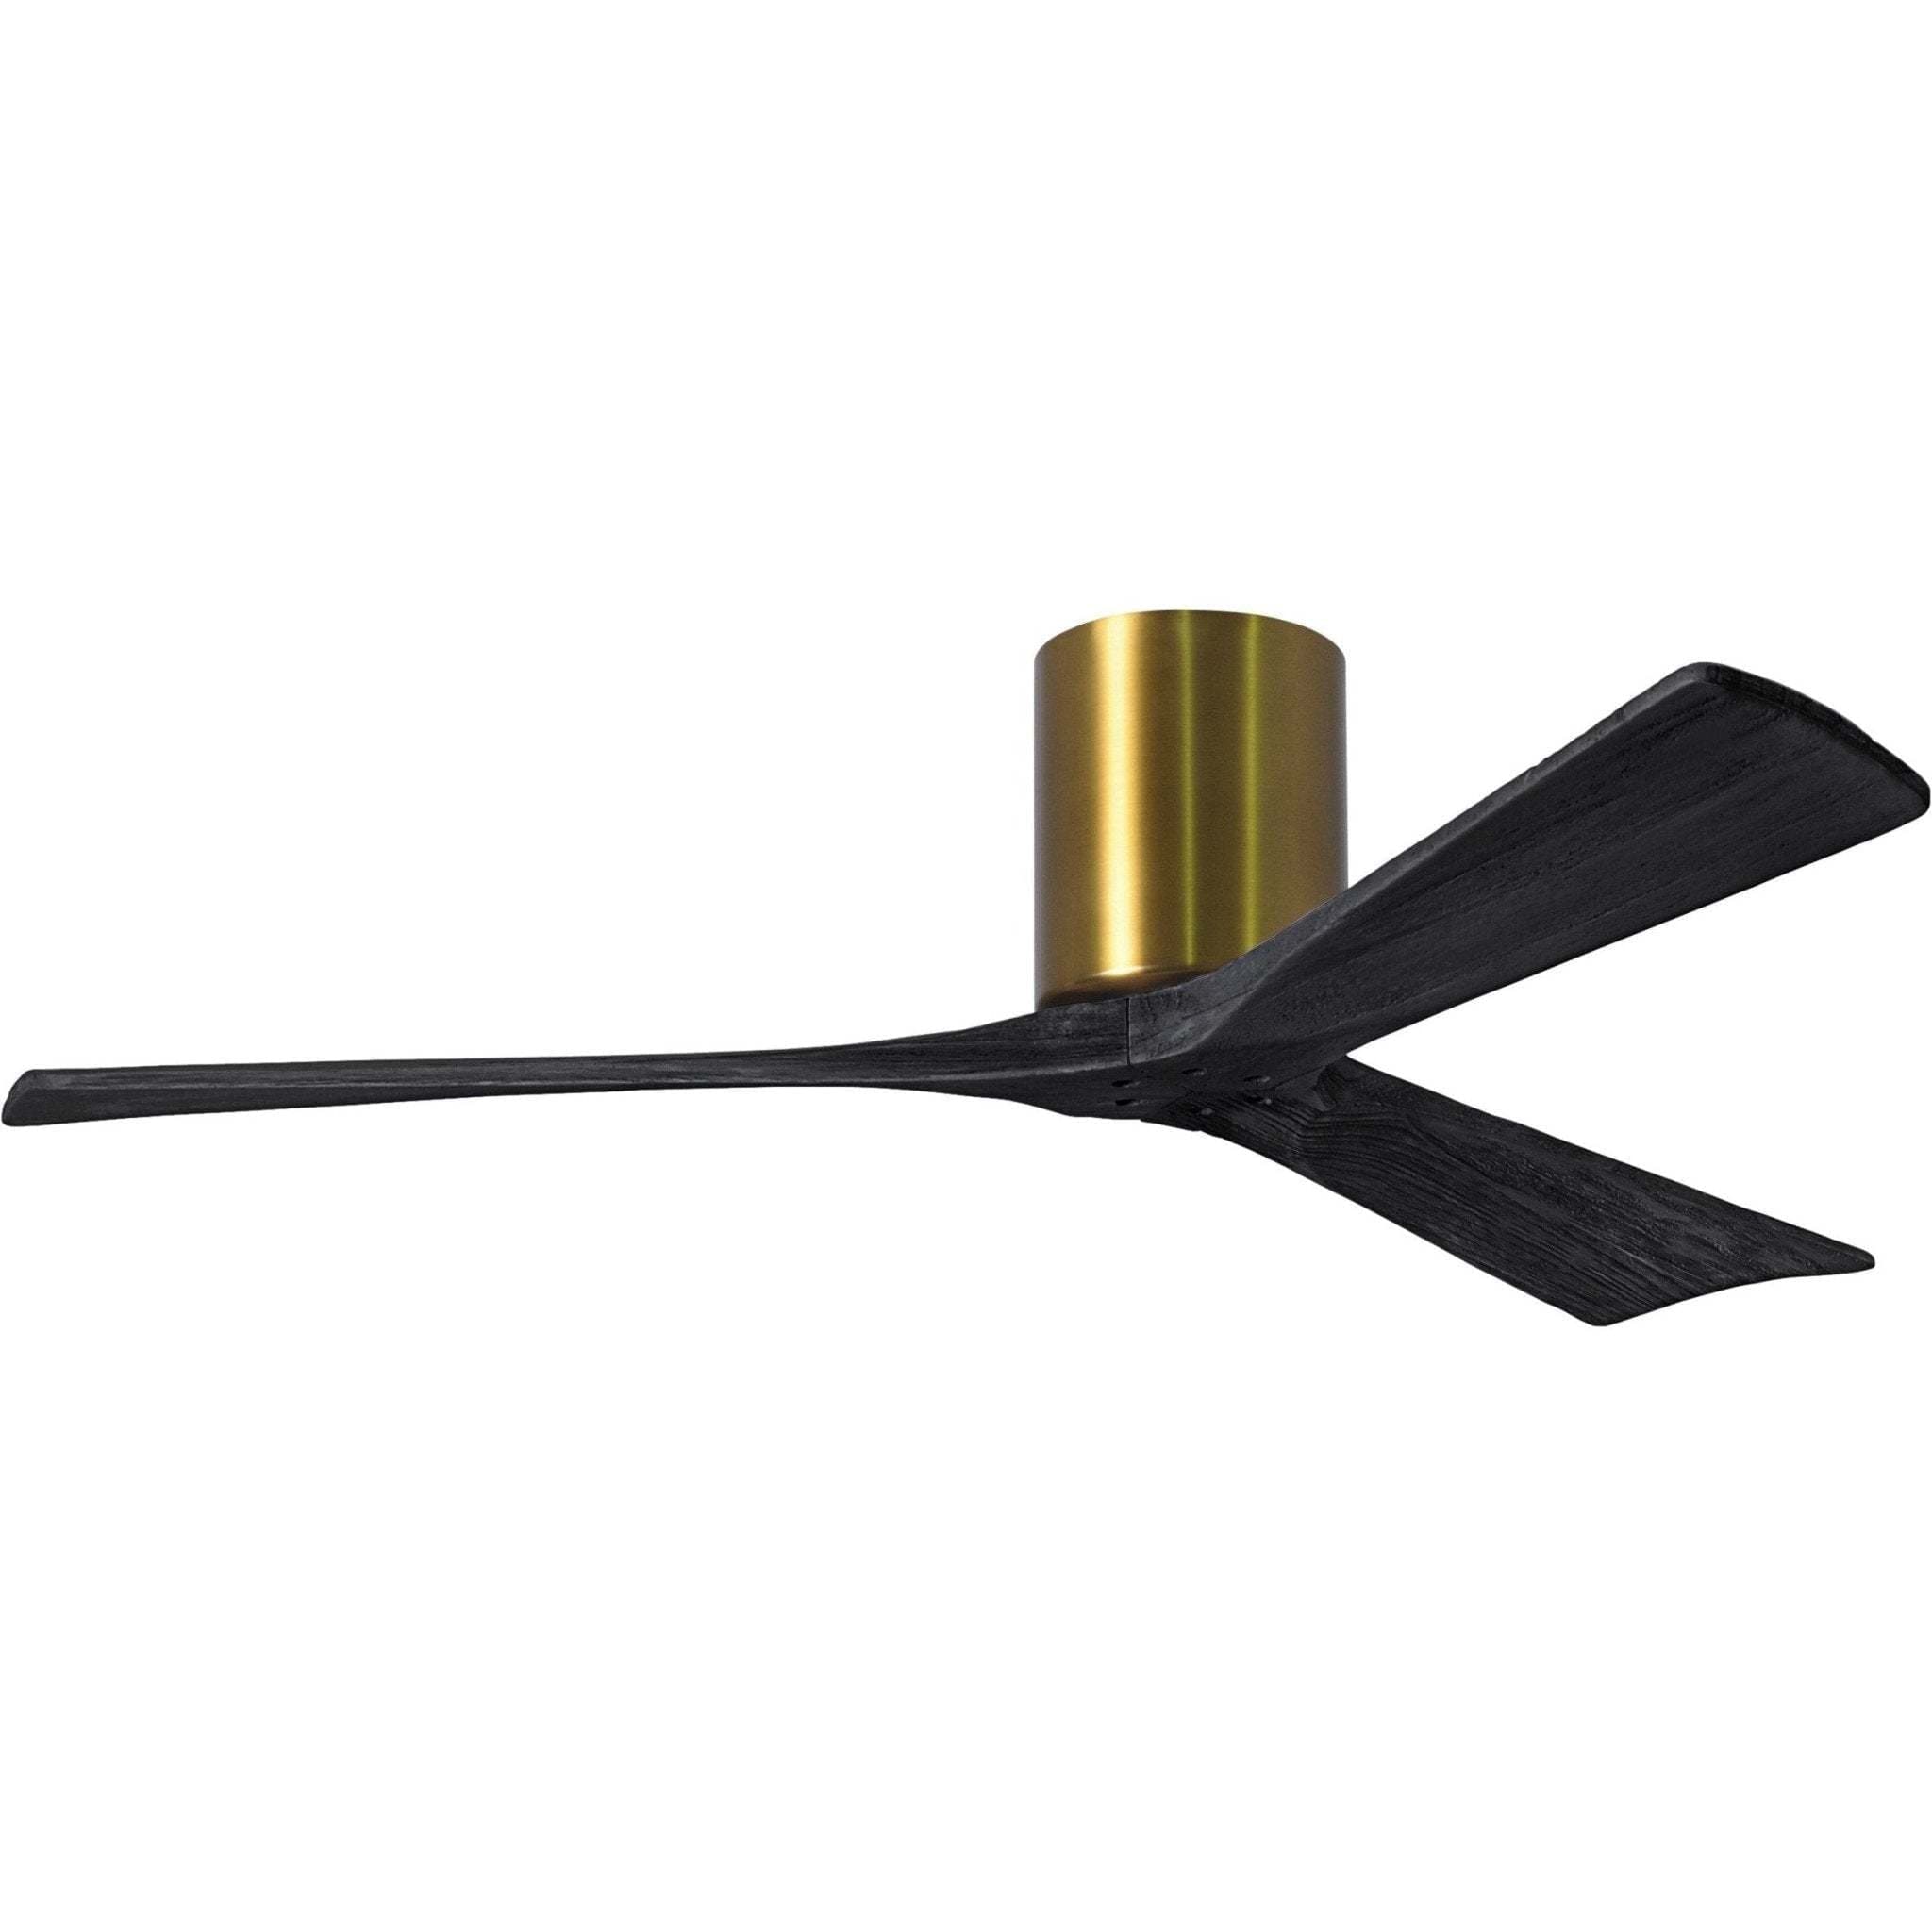 Shown in Brushed Brass with Matte Black Blades